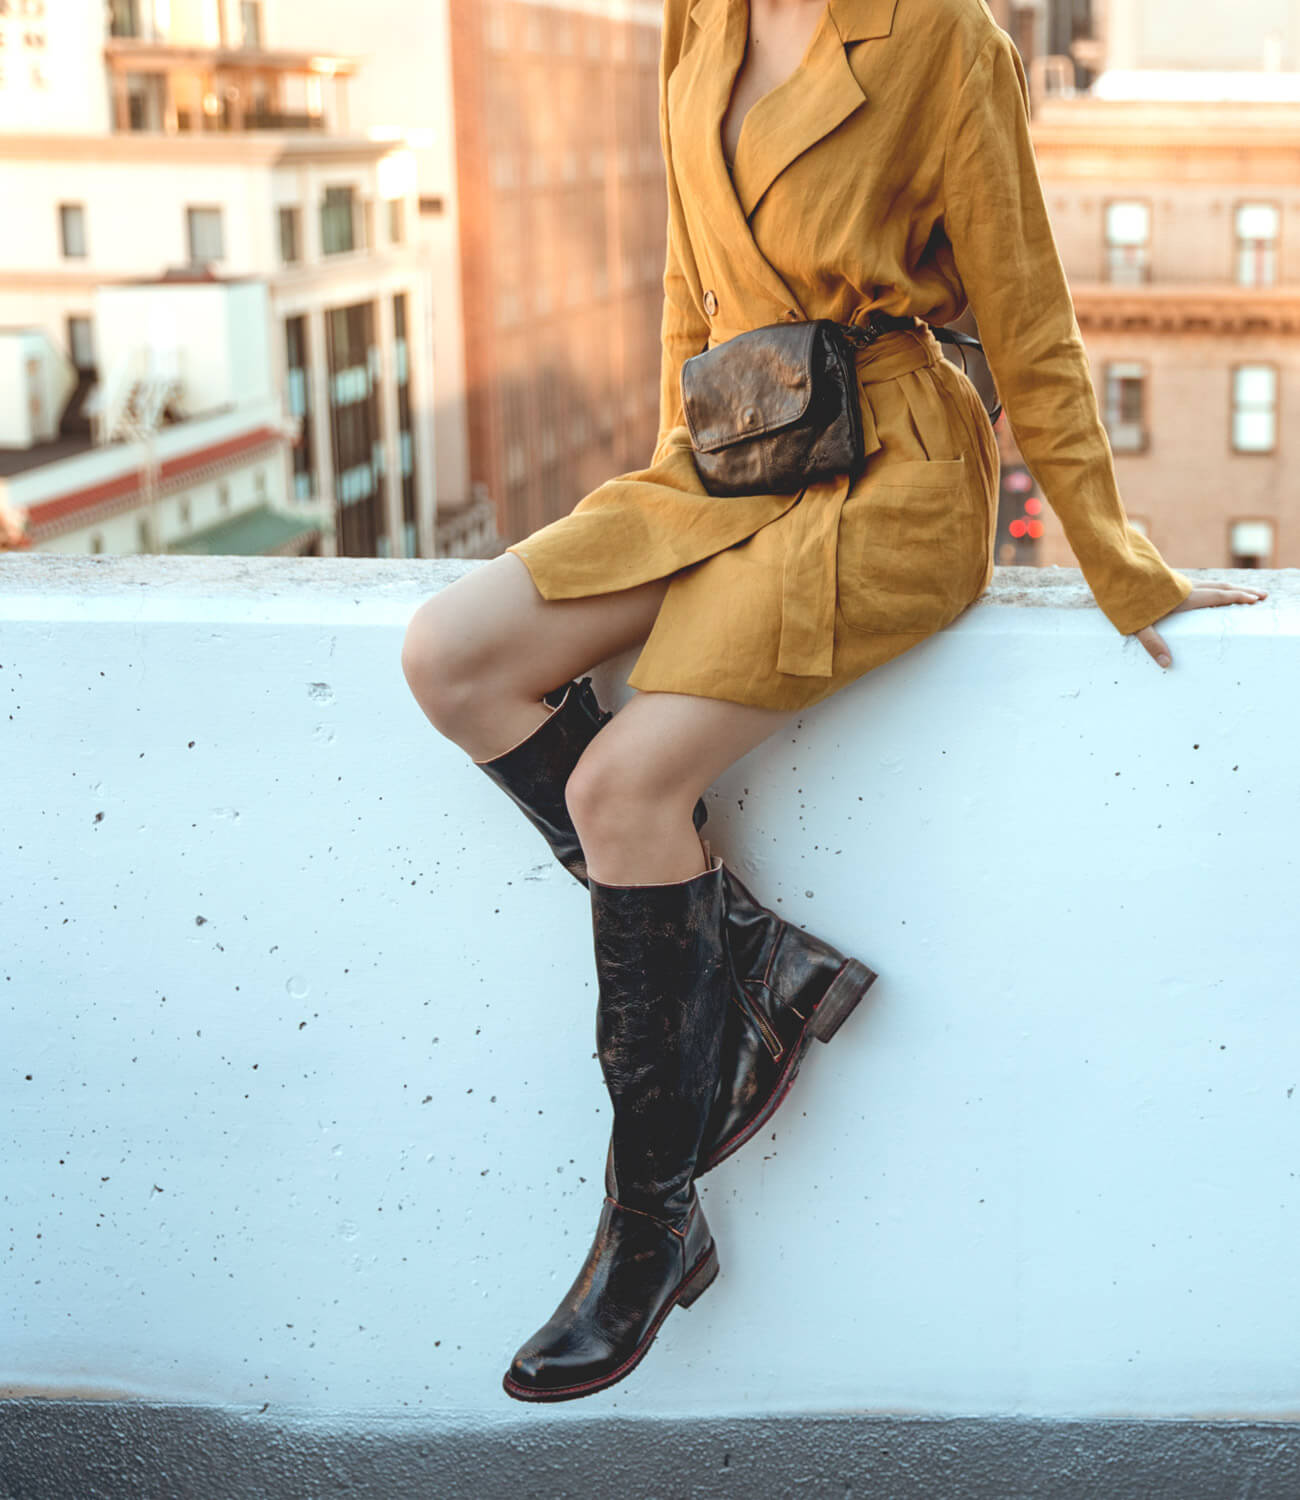 A woman in a yellow coat and black boots sitting on a Manchester ledge Bed Stu.